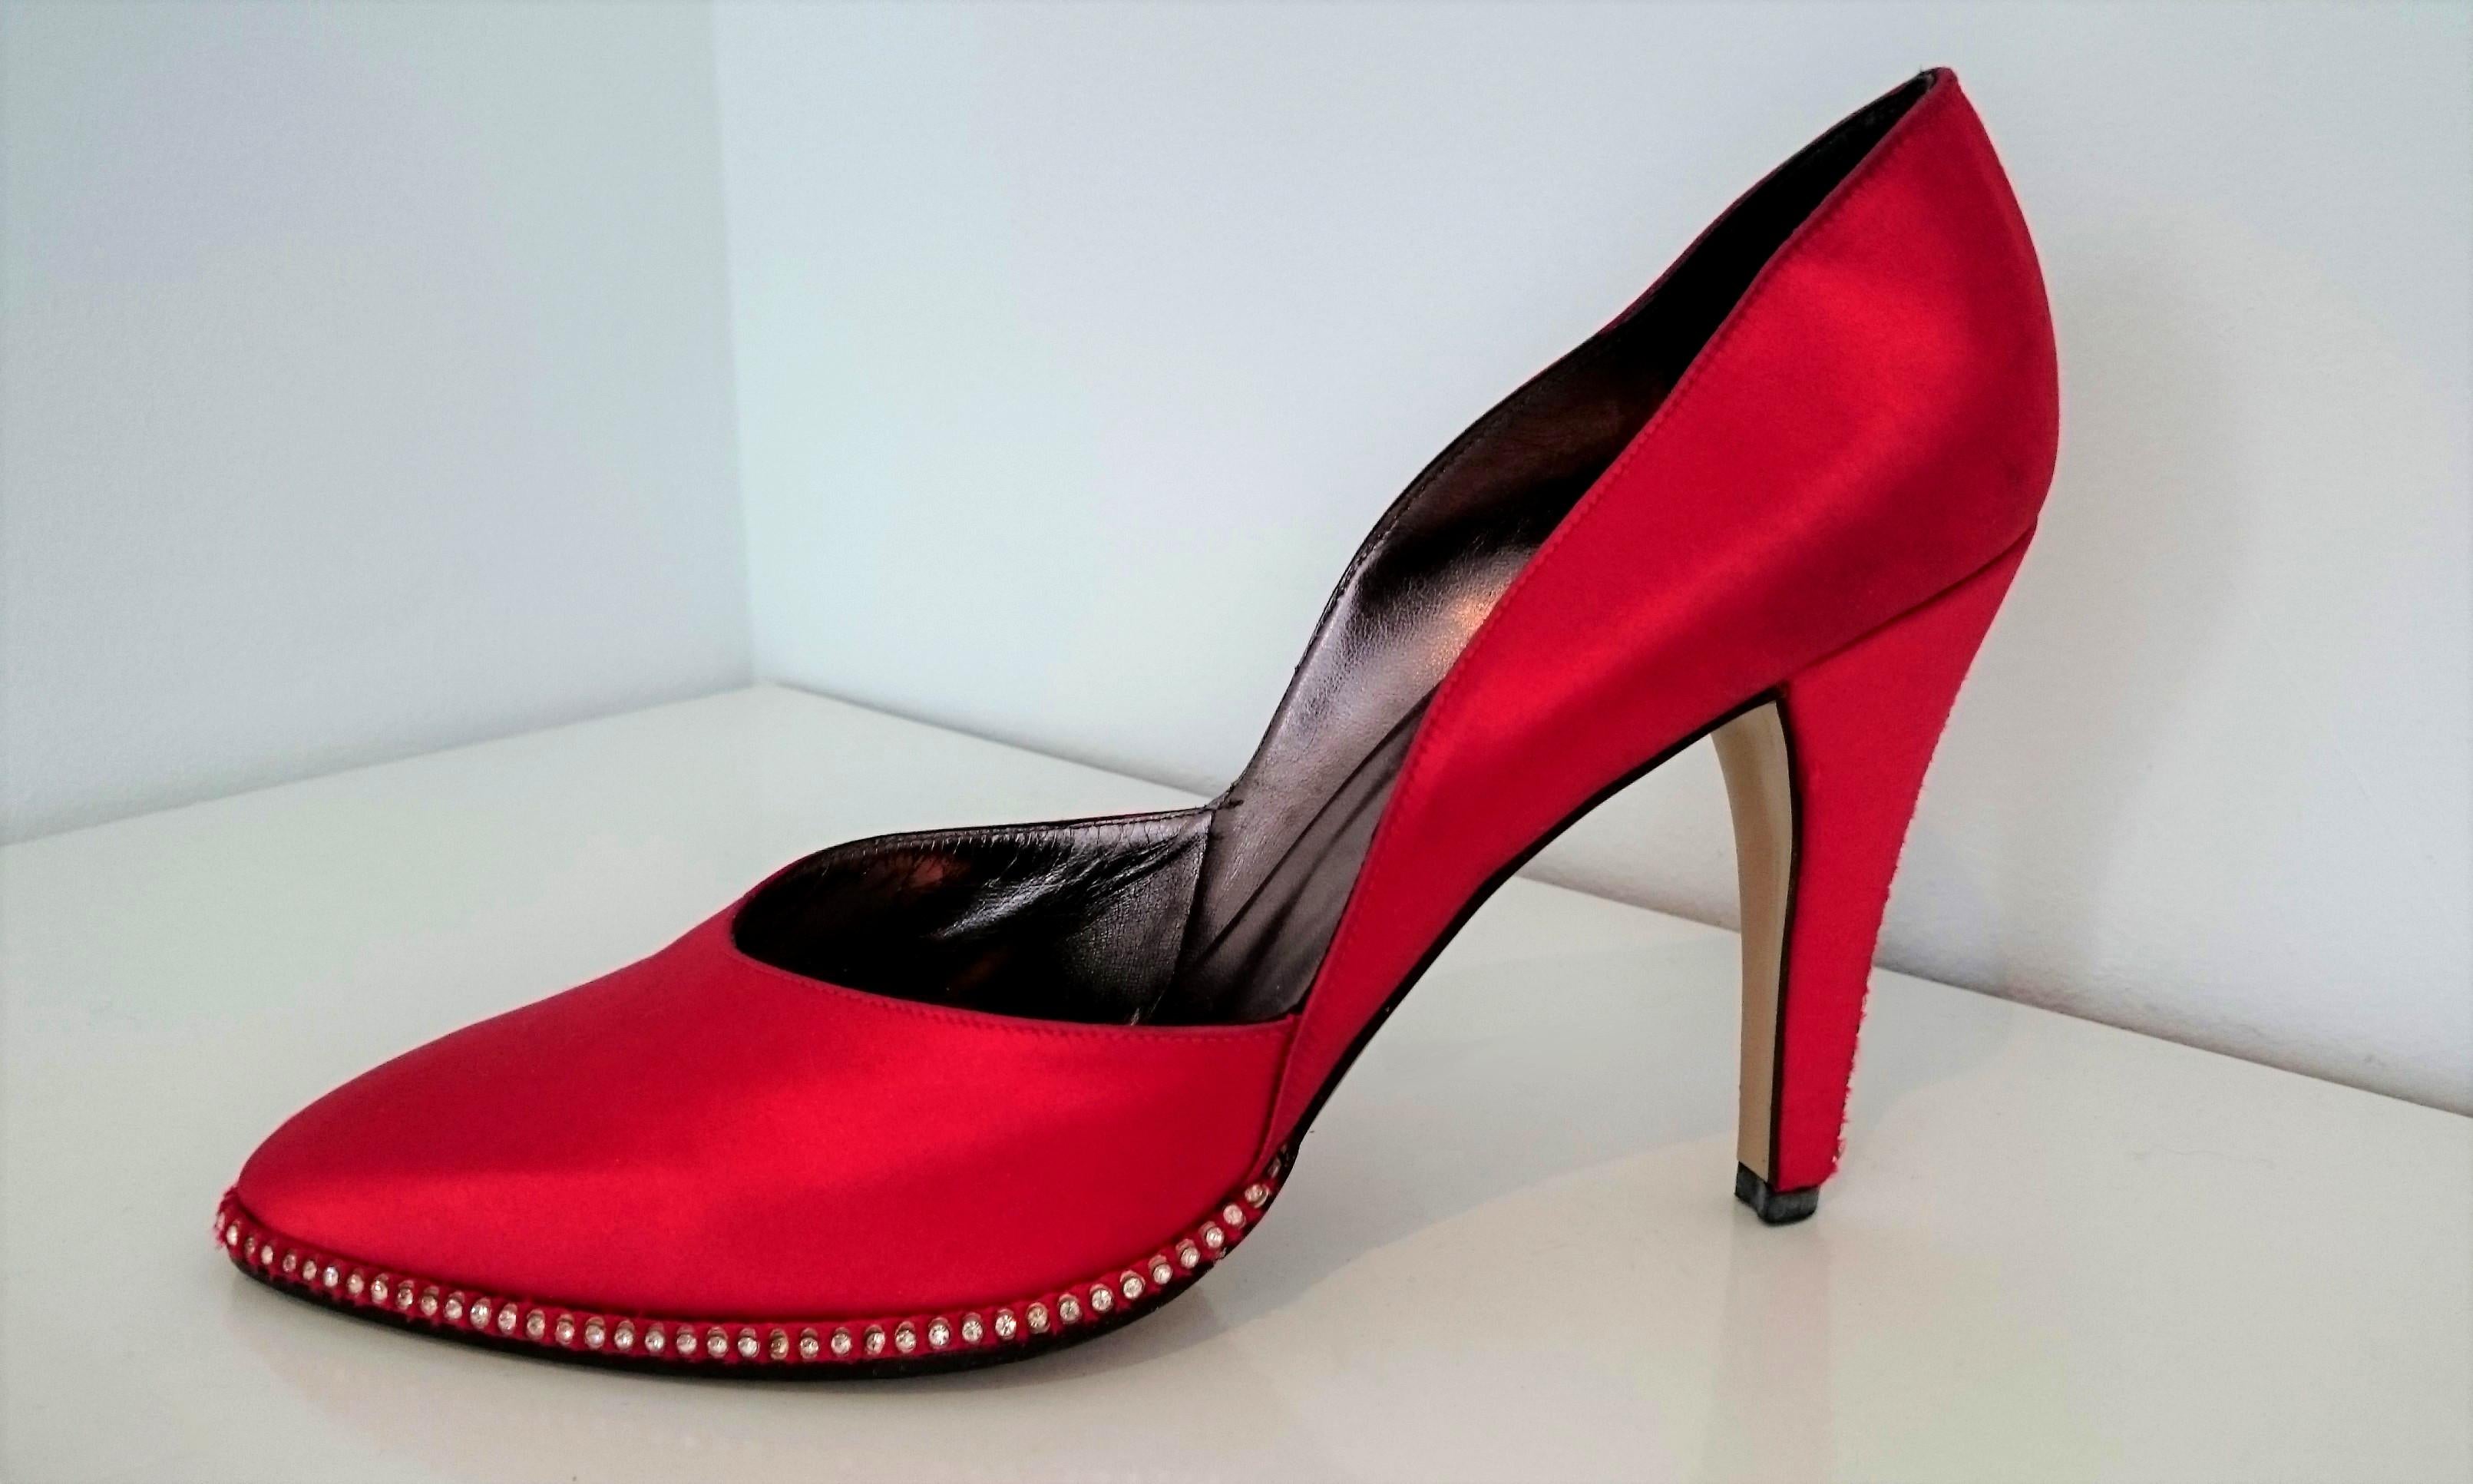 Red YSL Silk Heels Embroidered with Swarovski.
They are in very good condition, barely used for few days. 
The good condition can be seen by looking at the sole and heel.

Each shoe has 80 Swarovski diamonds around it and 25 on the back. 105